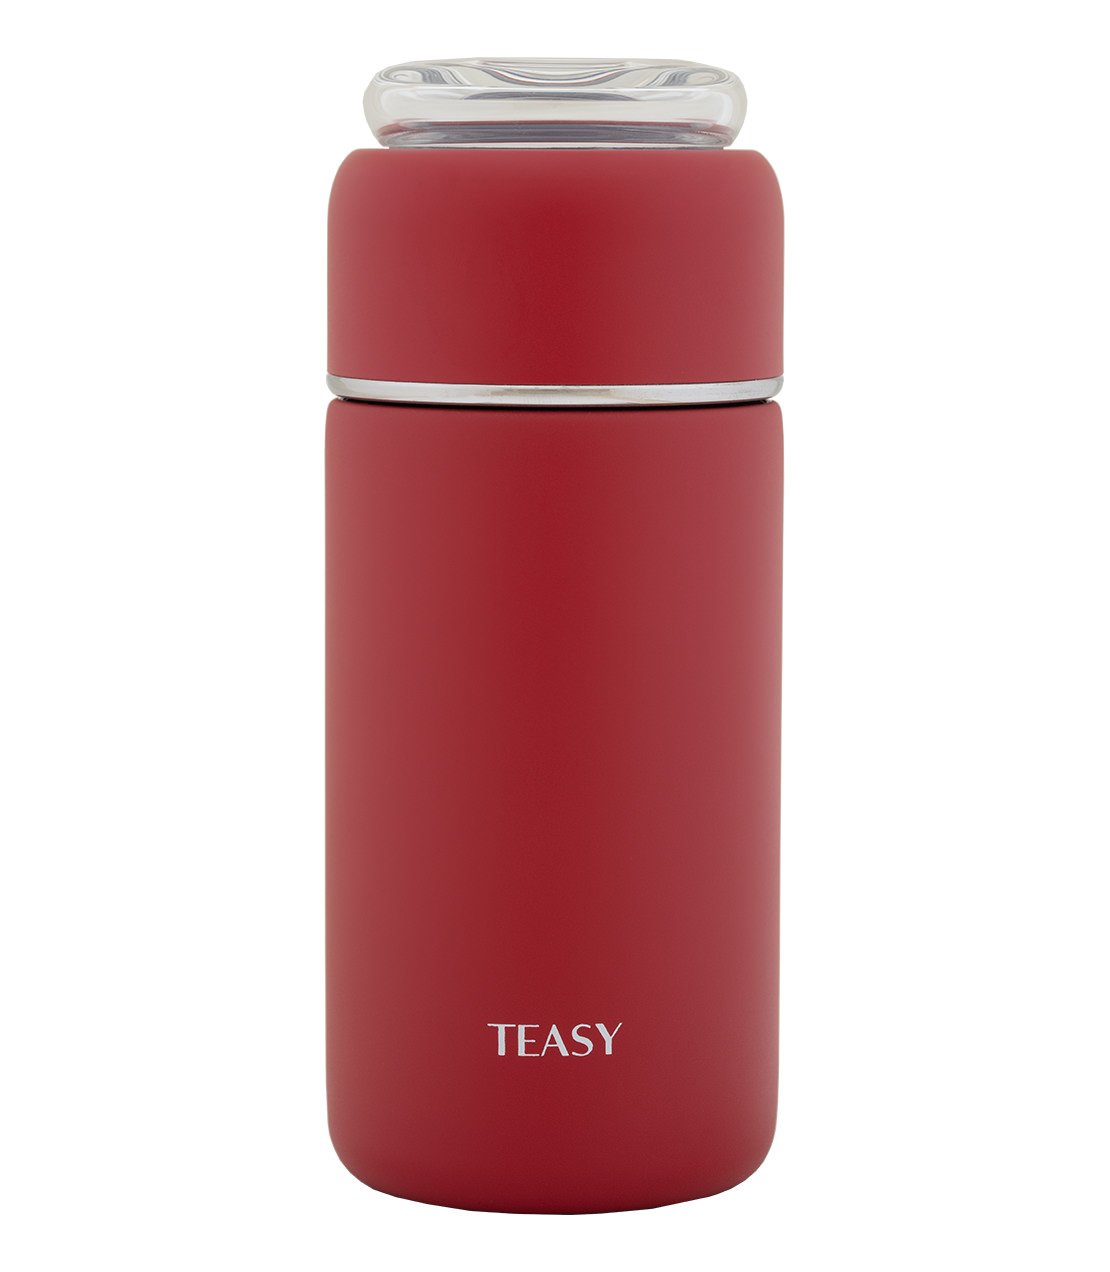 Teasy Insulated Flask (Multiple Colors) - 9 oz. Ruby Red - Harney & Sons Fine Teas